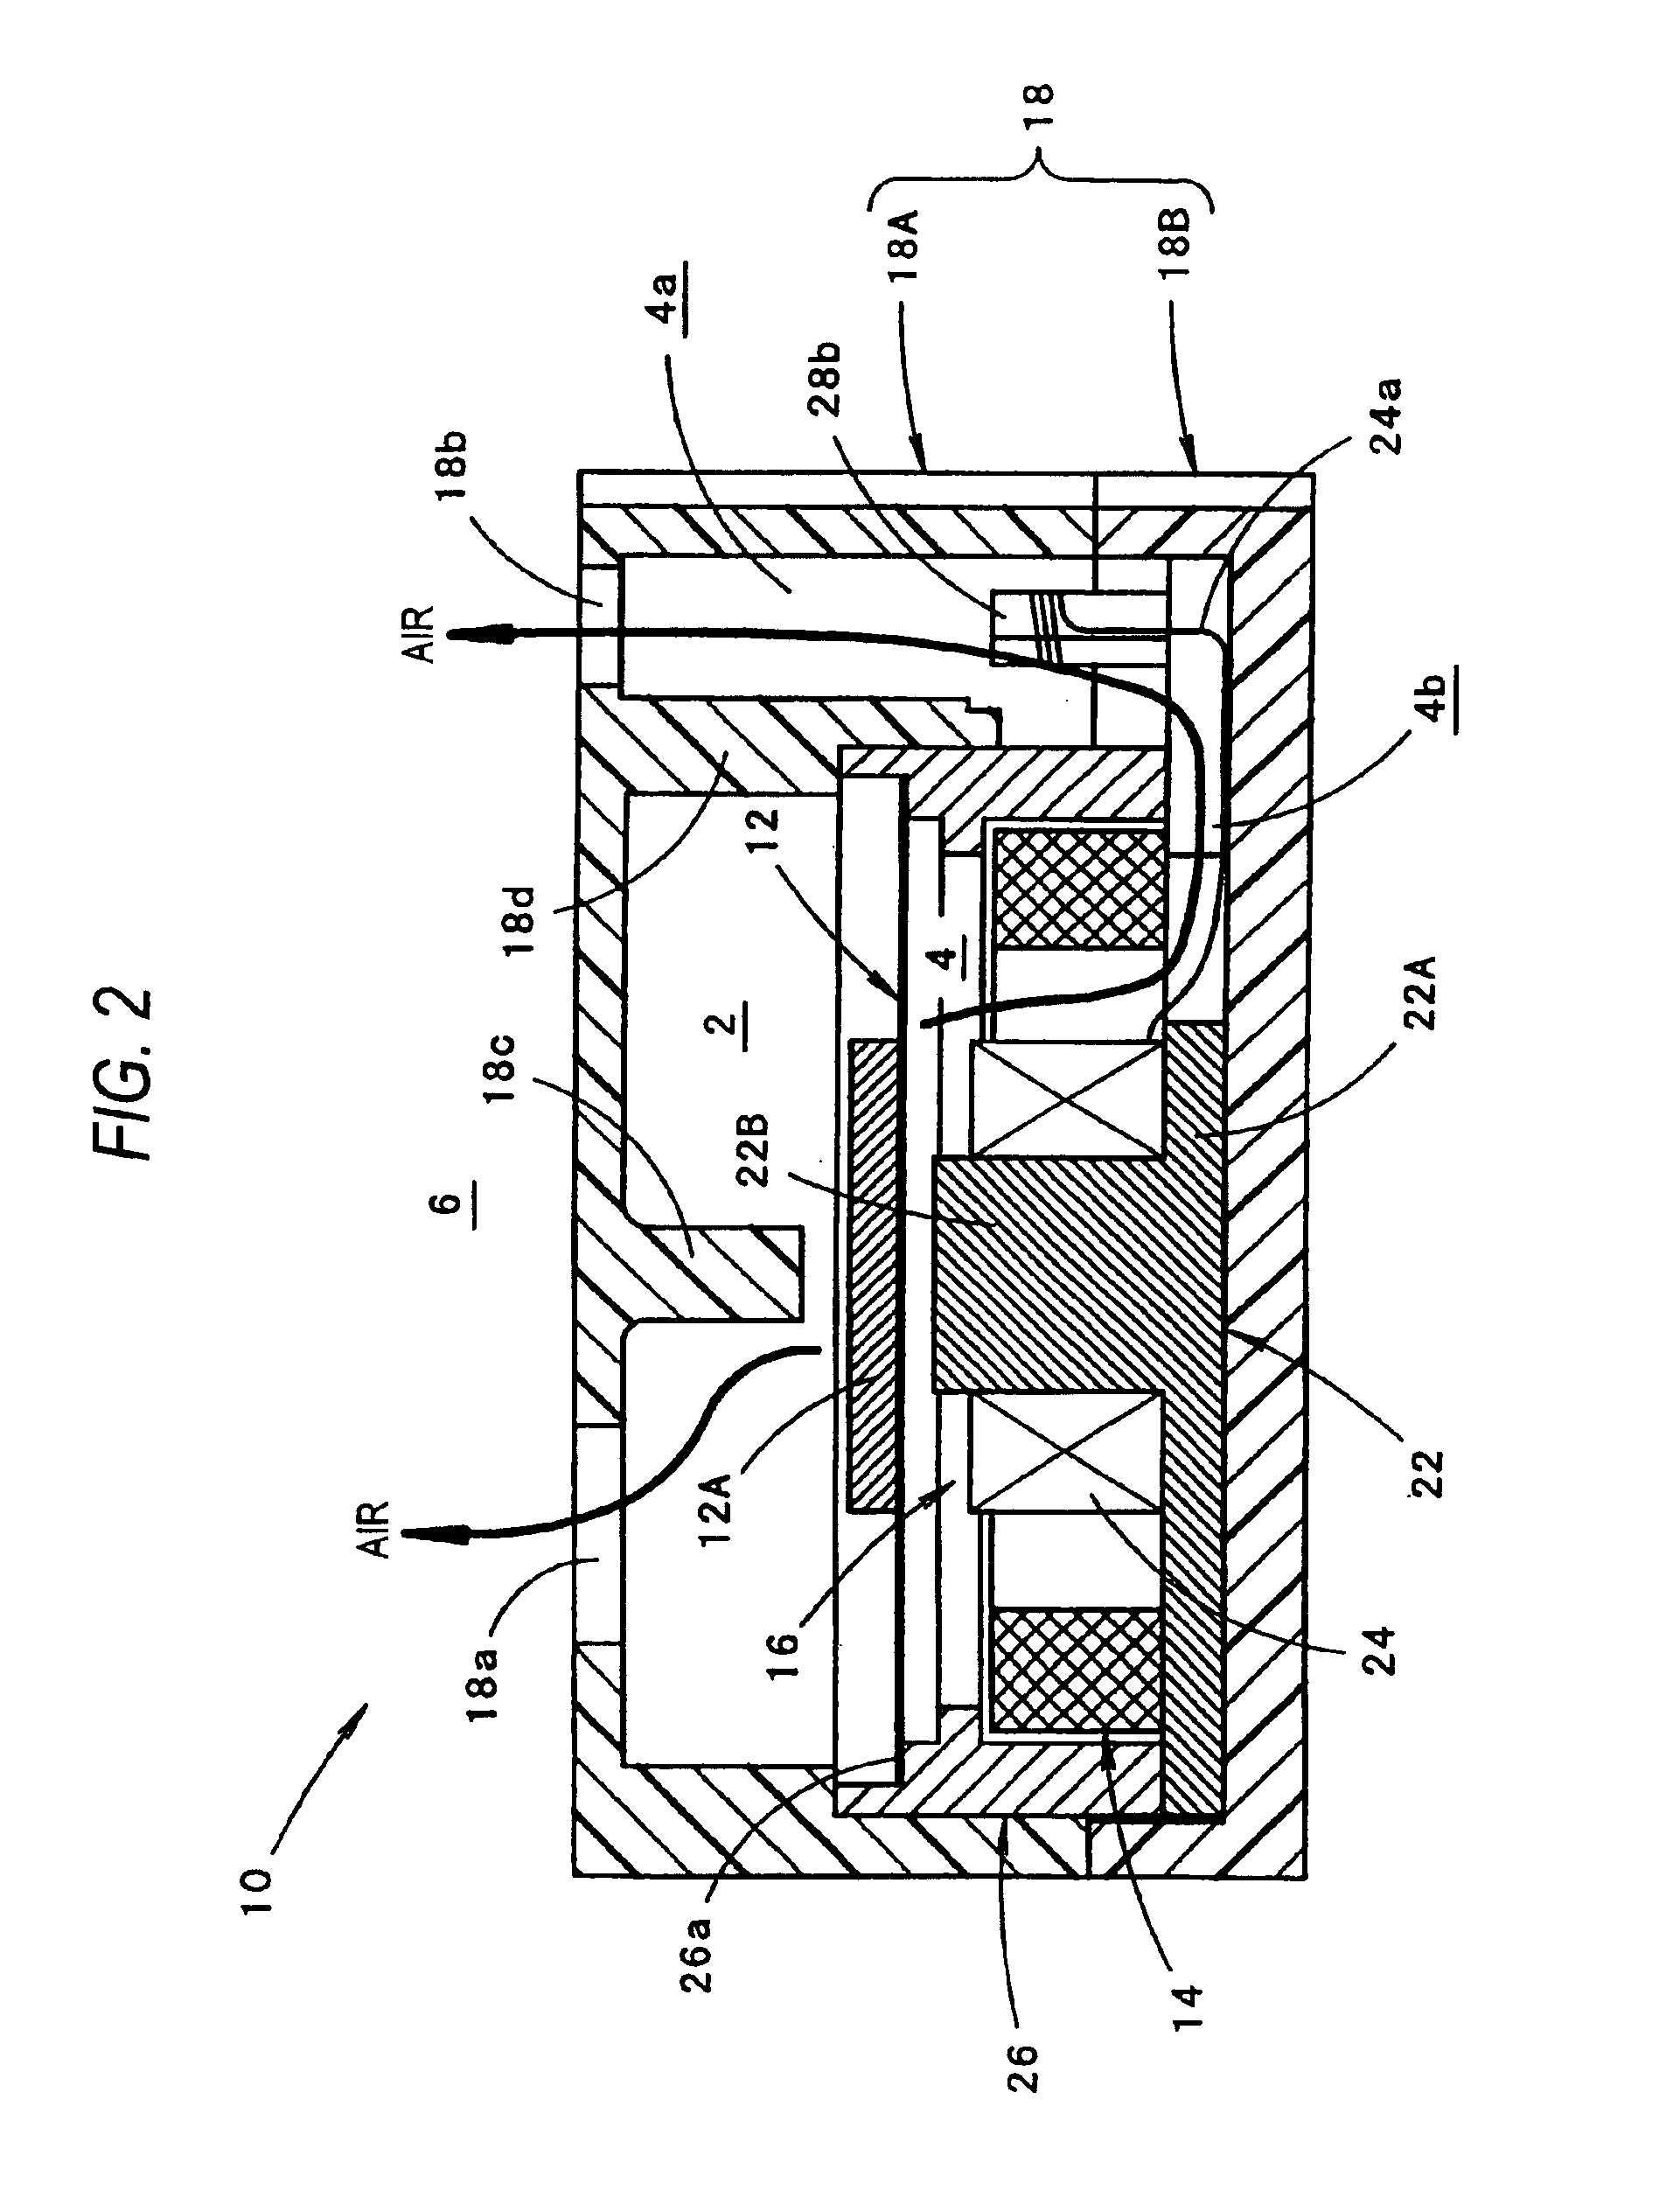 Electromagnetic electroacoustic transducer